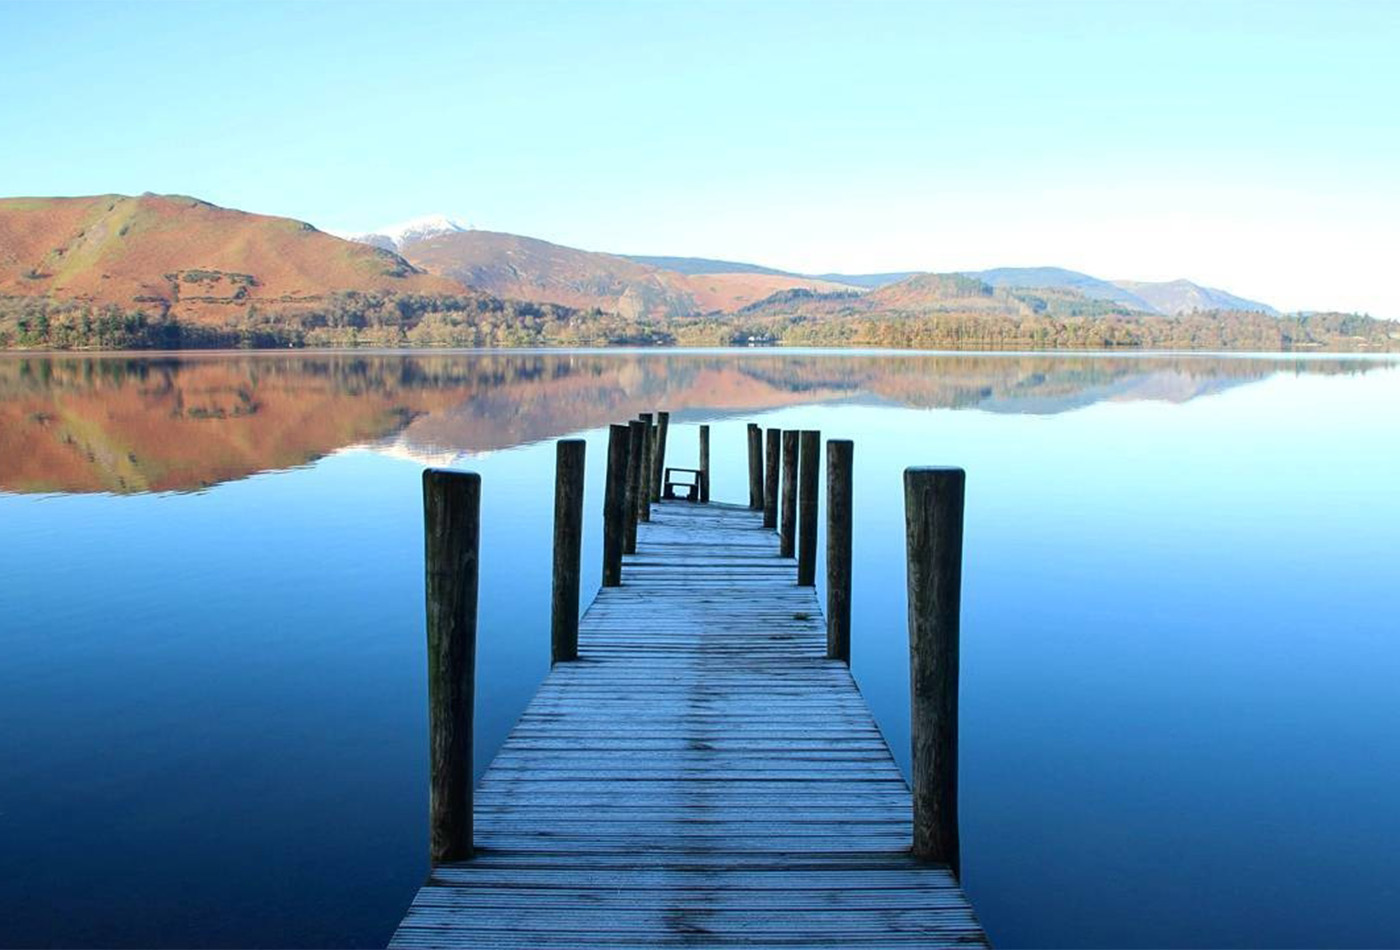 Ashness Jetty on Derwentwater with blue sky and the mountains reflected in the lake during winter